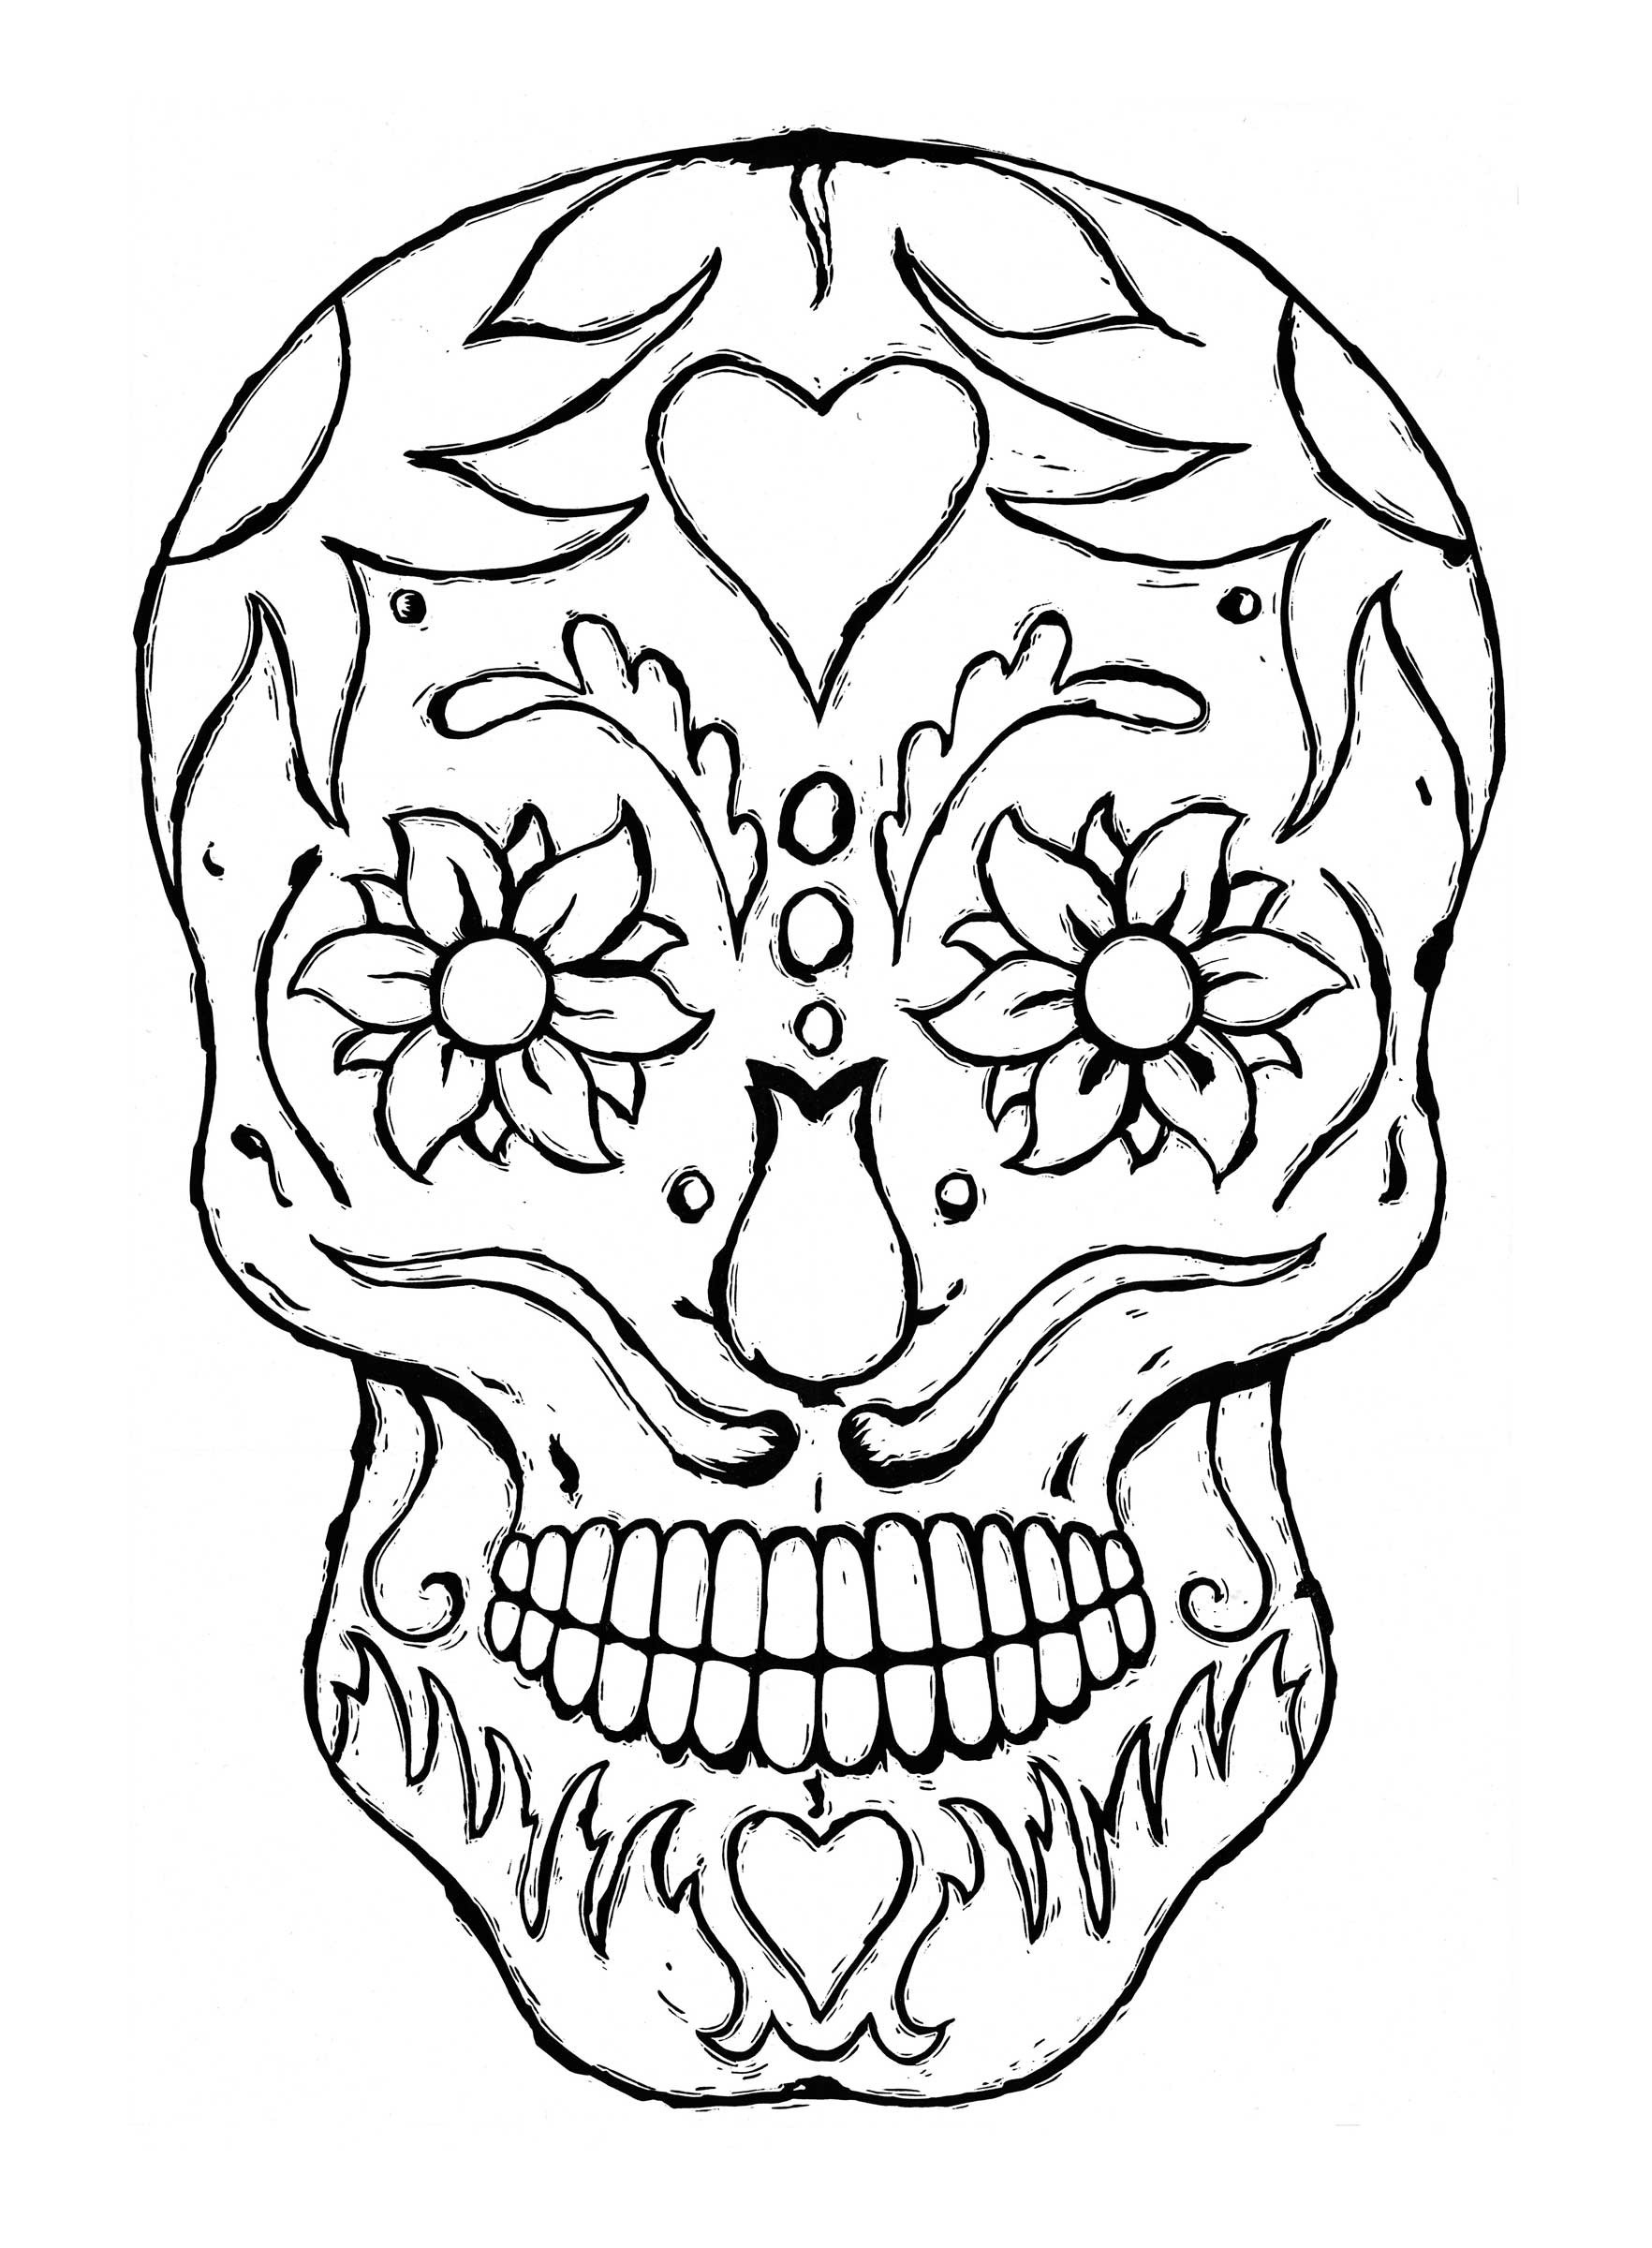 Coloring Book Pages for Adults